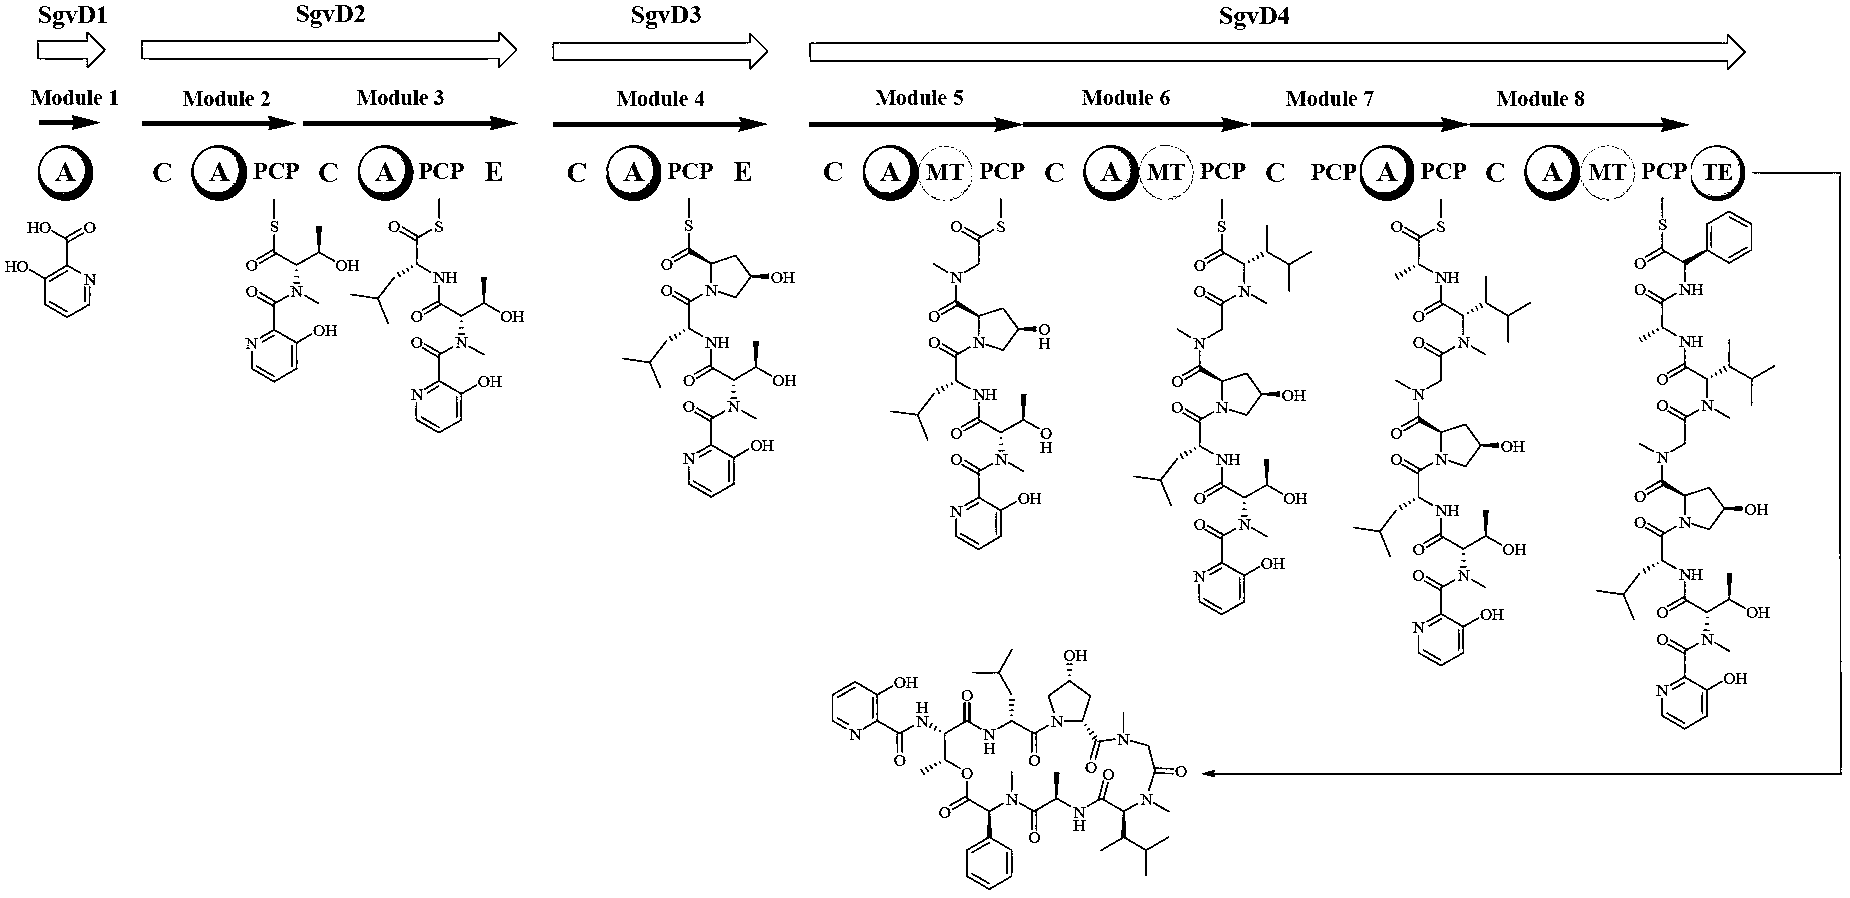 Biosynthesis gene cluster of griseoviridin and viridogrisein and application of biosynthesis gene cluster